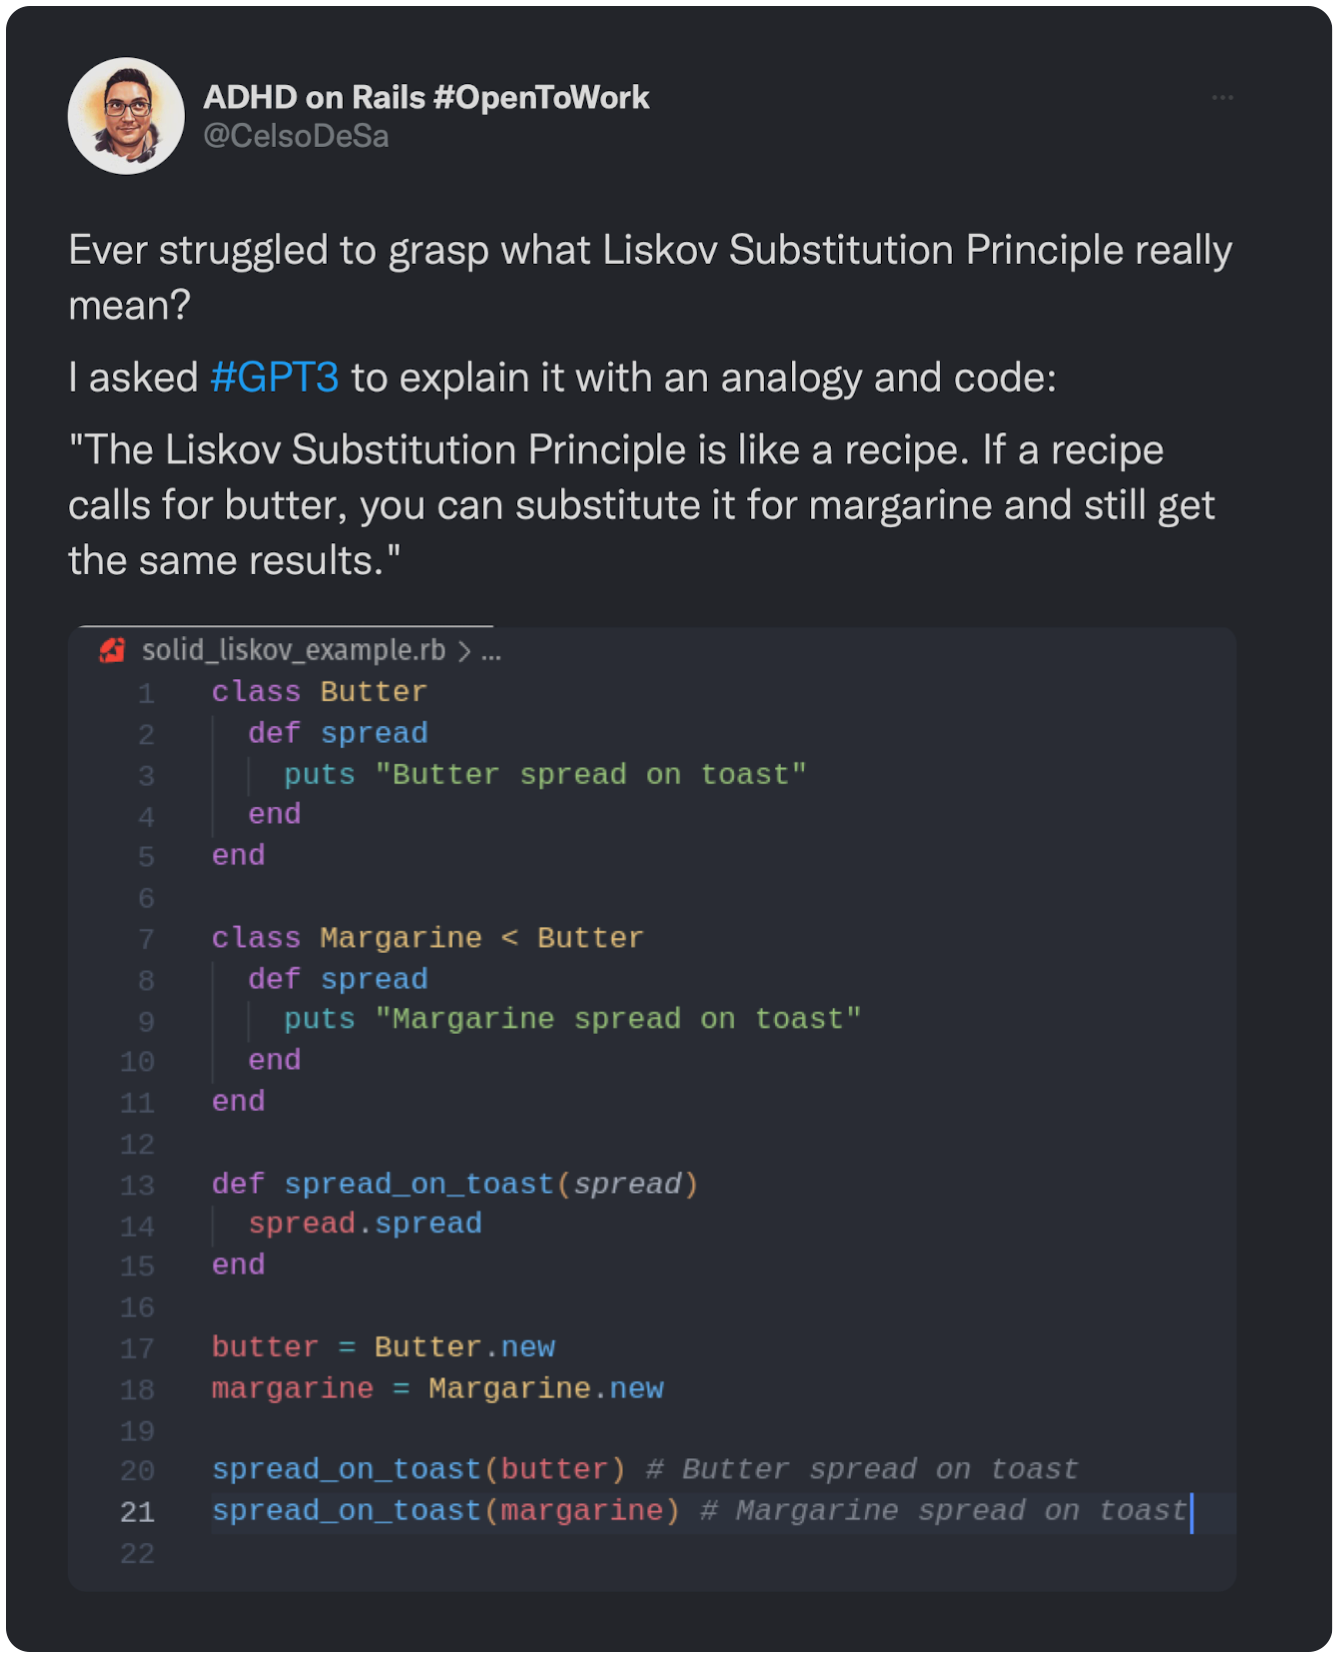 Ever struggled to grasp what Liskov Substitution Principle really mean? I asked #GPT3 to explain it with an analogy and code: "The Liskov Substitution Principle is like a recipe. If a recipe calls for butter, you can substitute it for margarine and still get the same results.